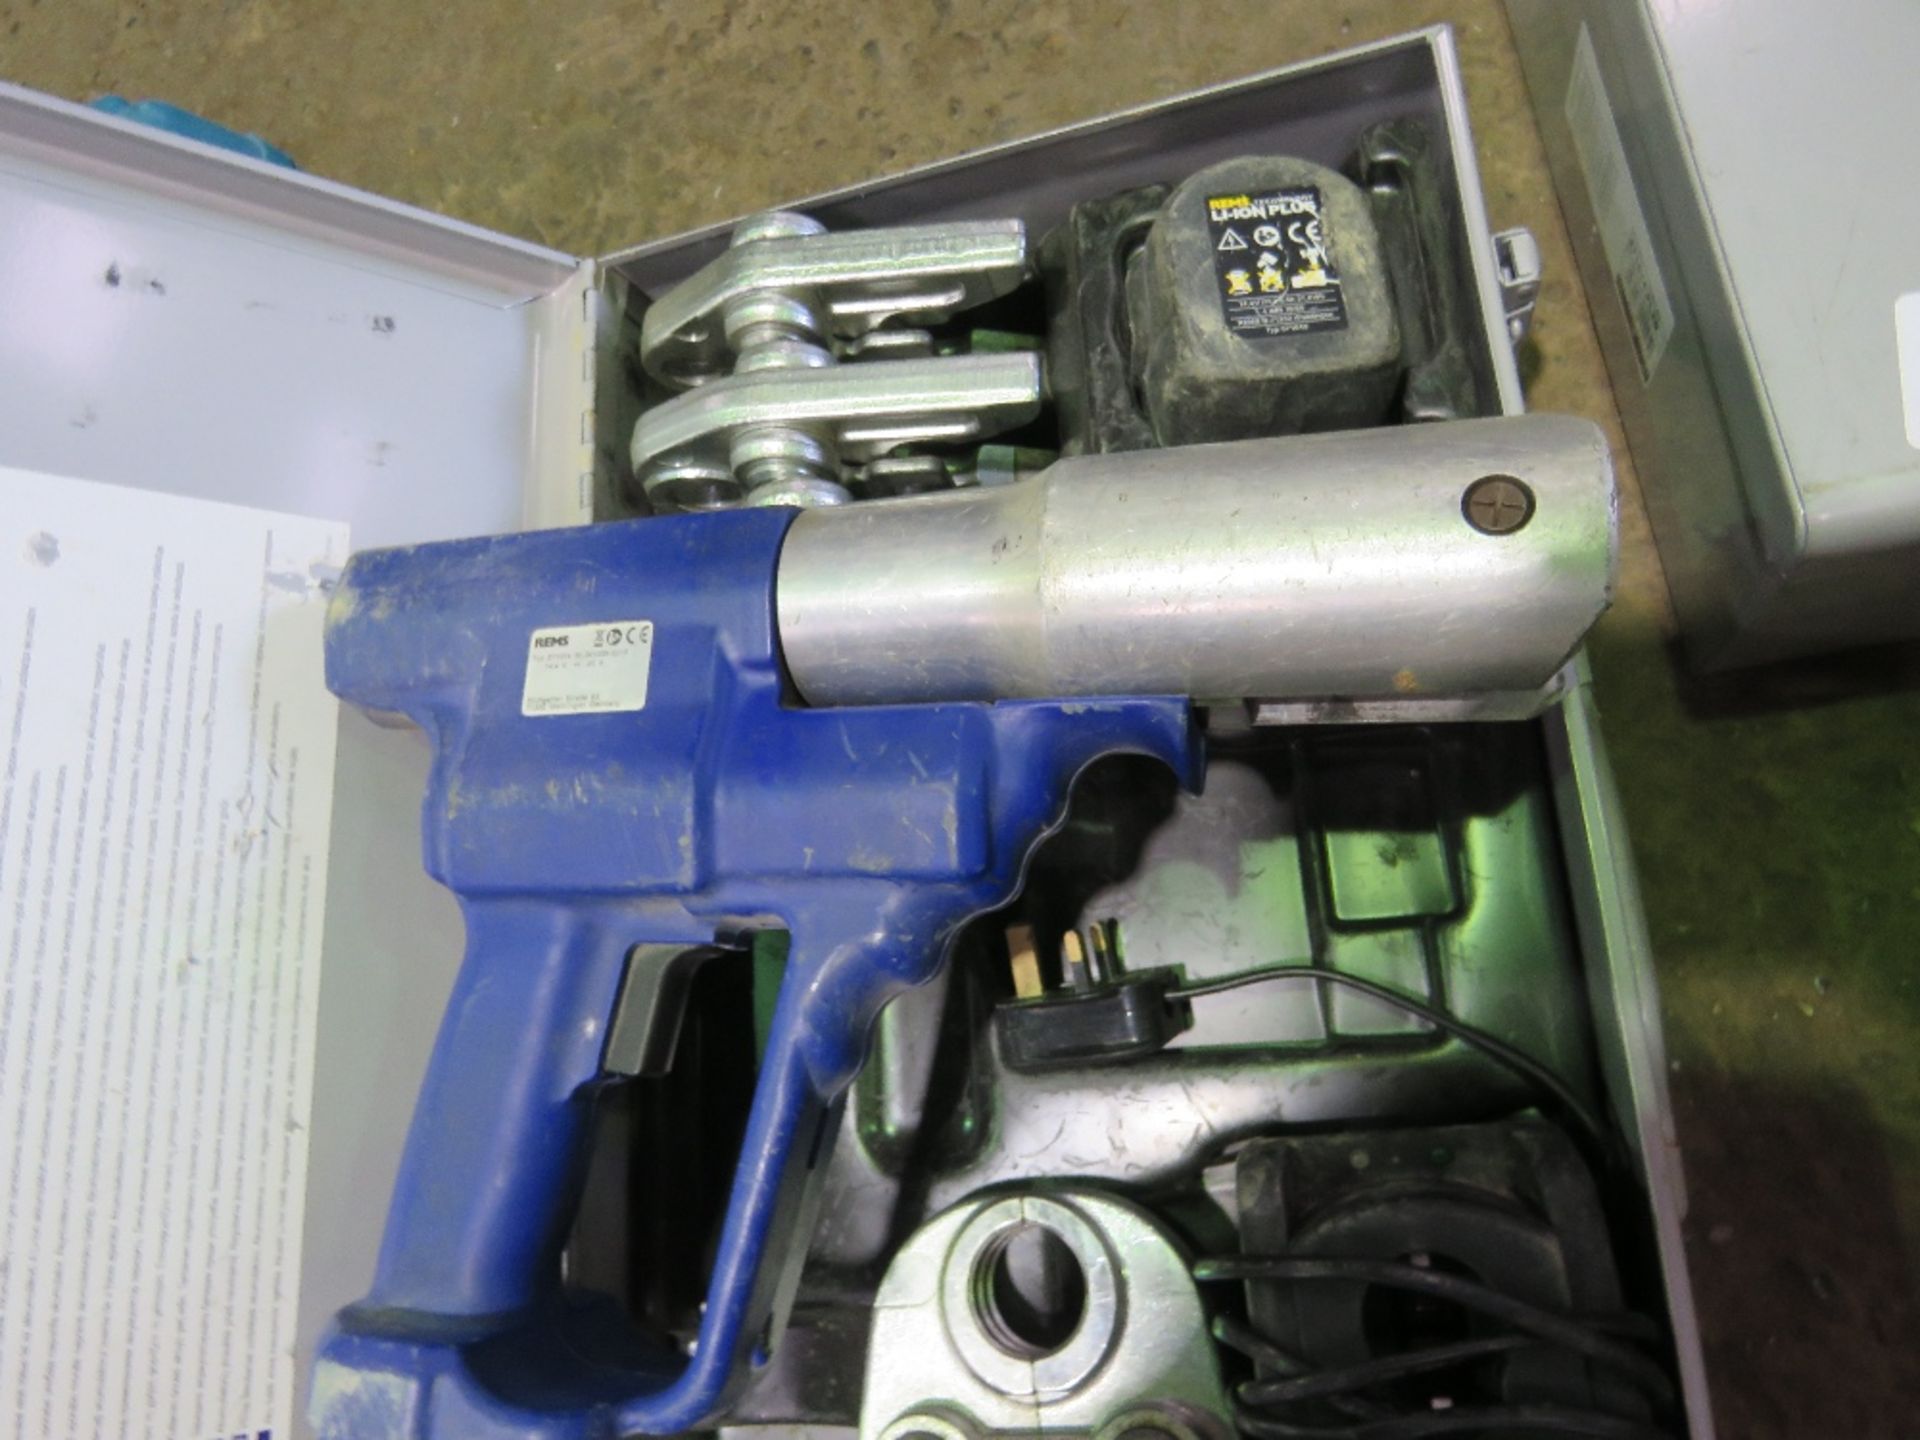 REMS AKKU-PRESS ACC BATTERY POWERED CRIMPING SET IN A CASE. SOURCED FROM LARGE CONSTRUCTION COMPANY - Image 2 of 6